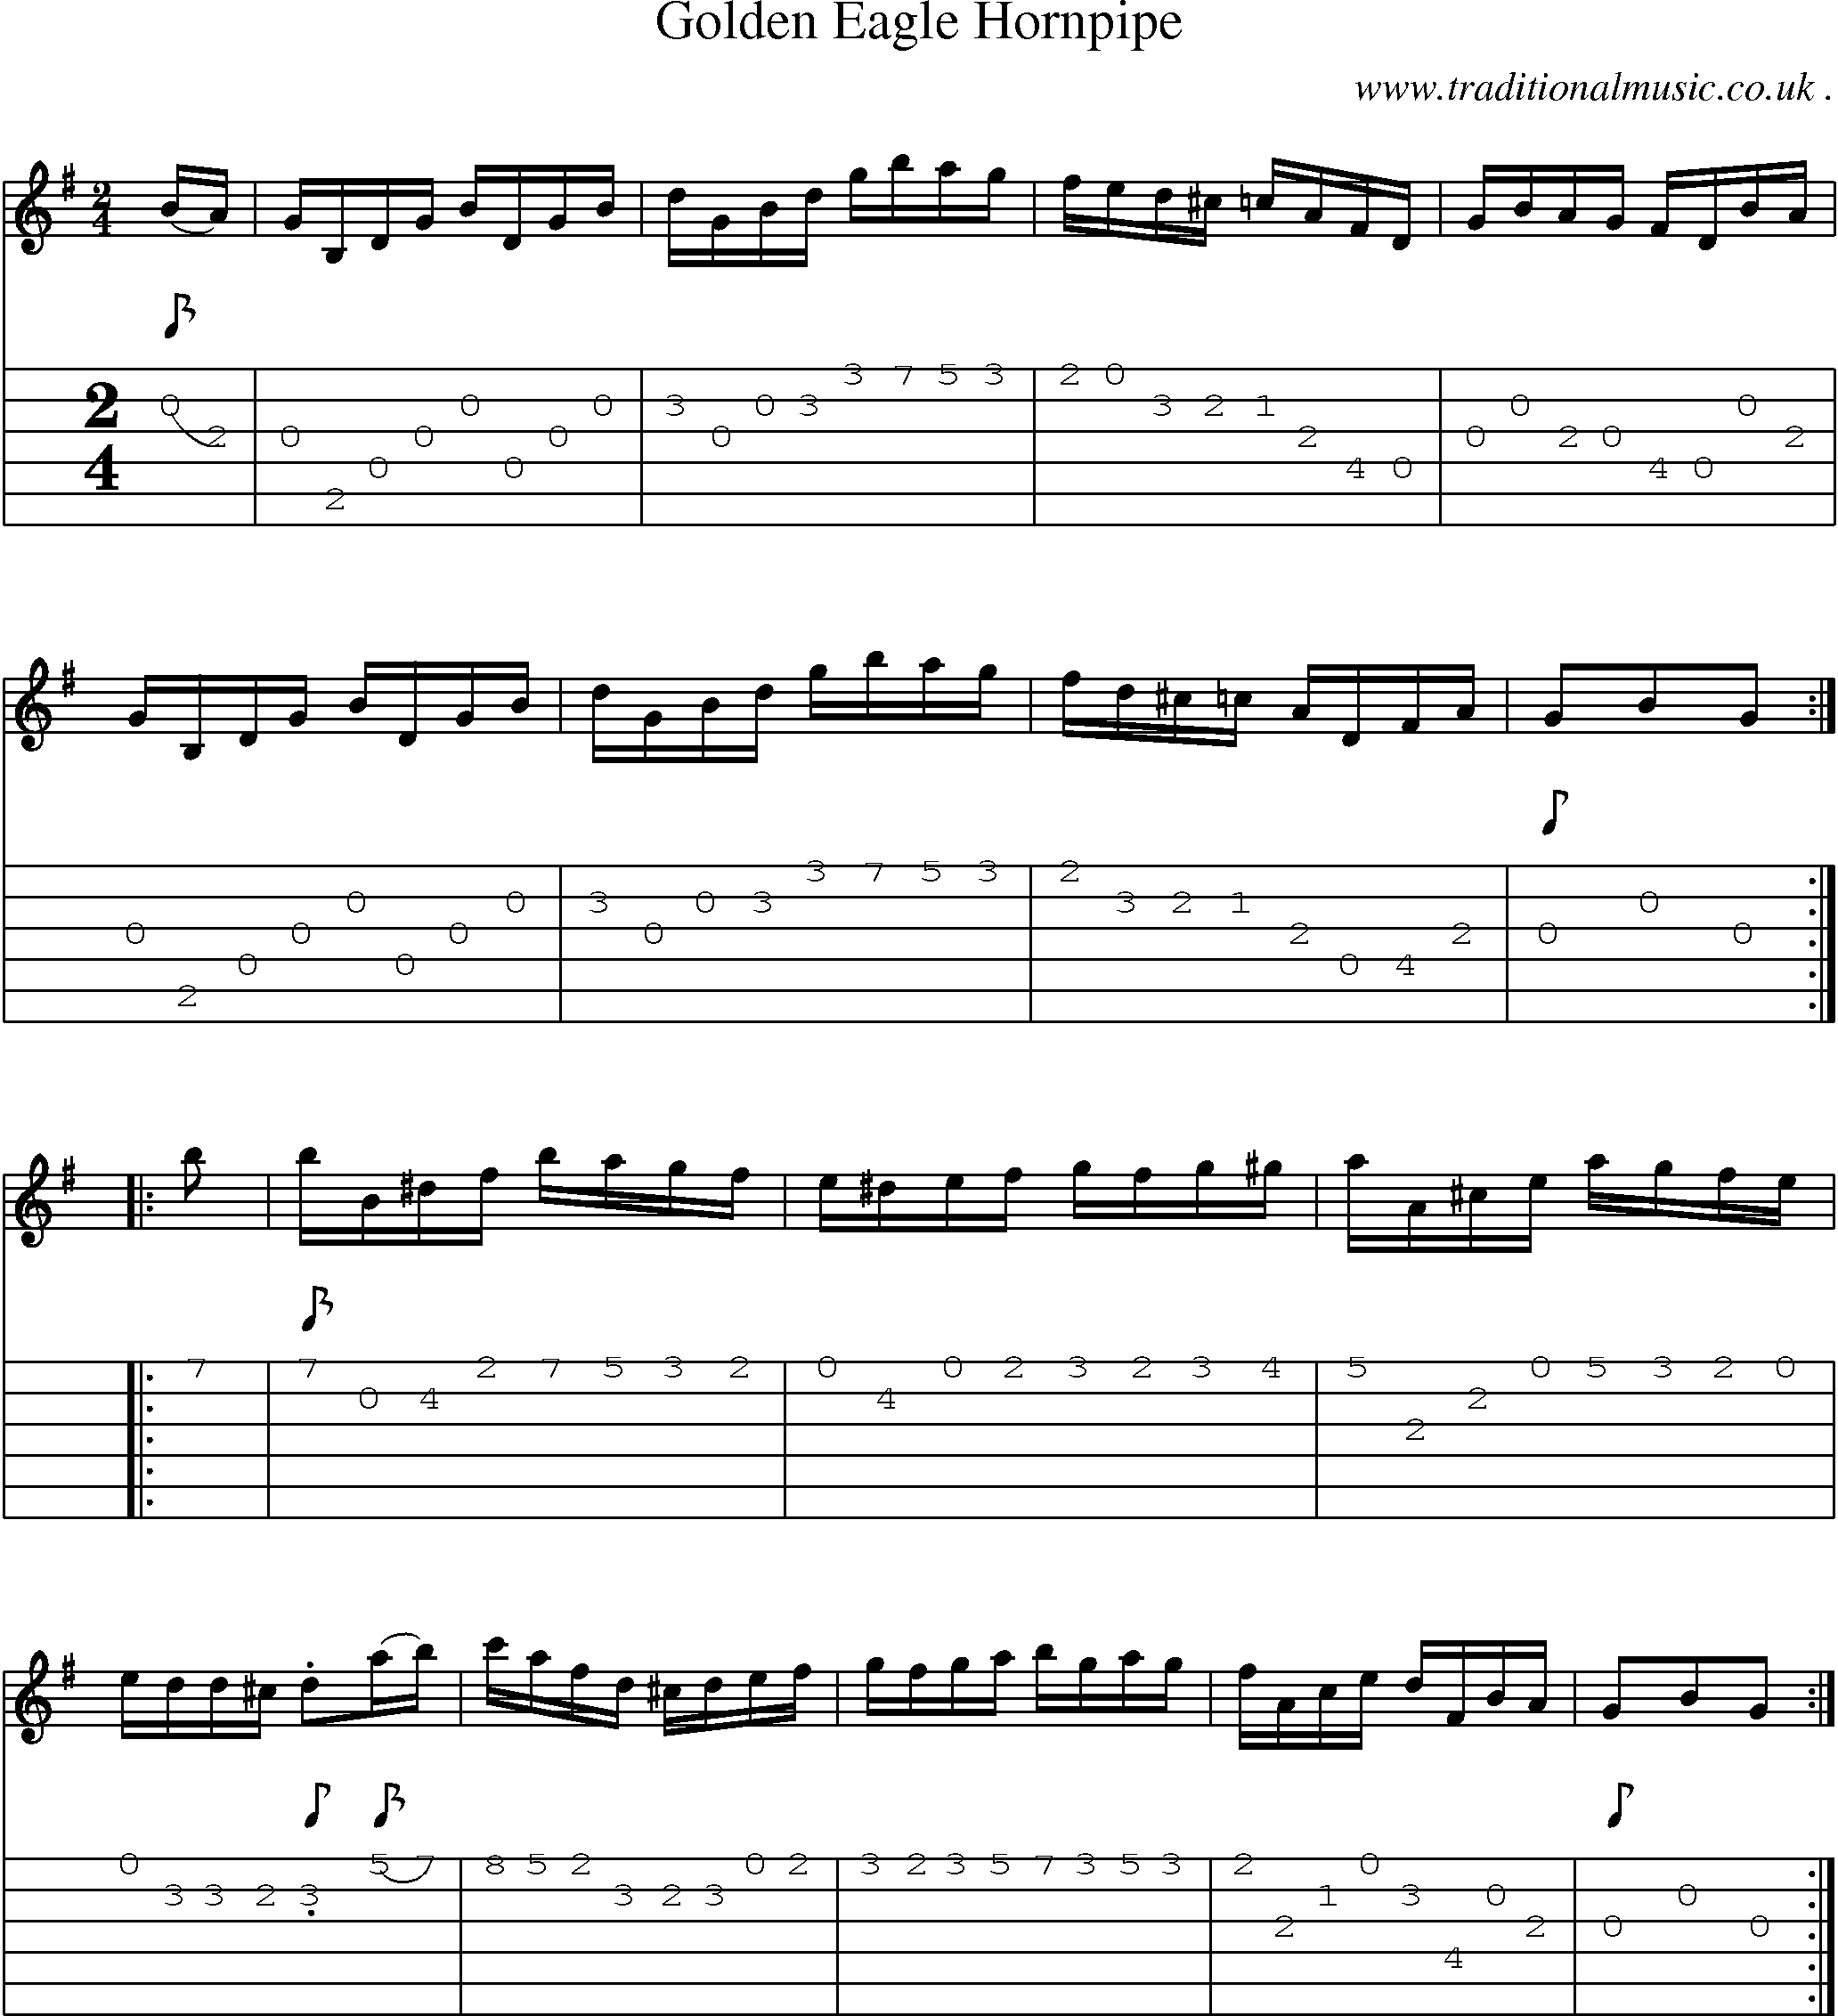 Sheet-Music and Guitar Tabs for Golden Eagle Hornpipe